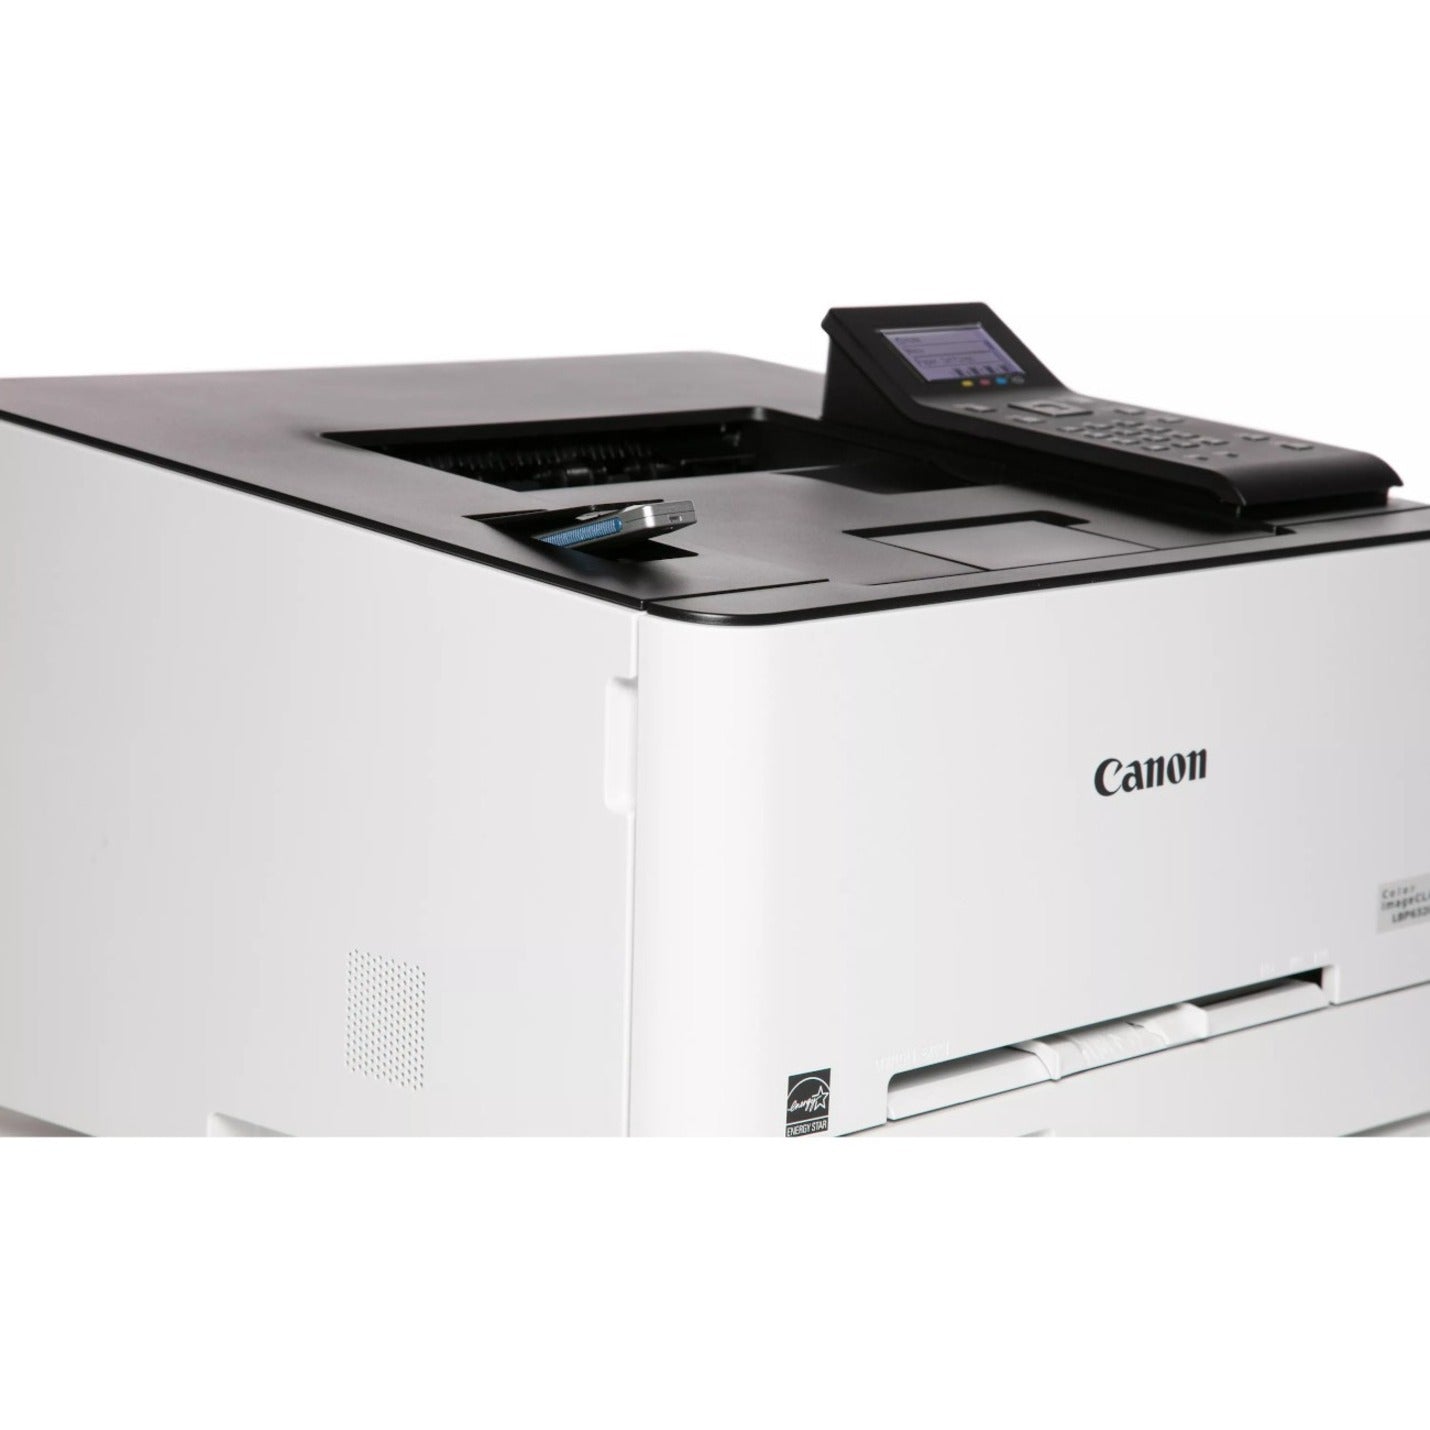 Canon 5159C003 imageCLASS LBP632Cdw Laser Printer, Fast Color Laser Output, WiFi Direct, Mobile Ready, 3 Year Warranty